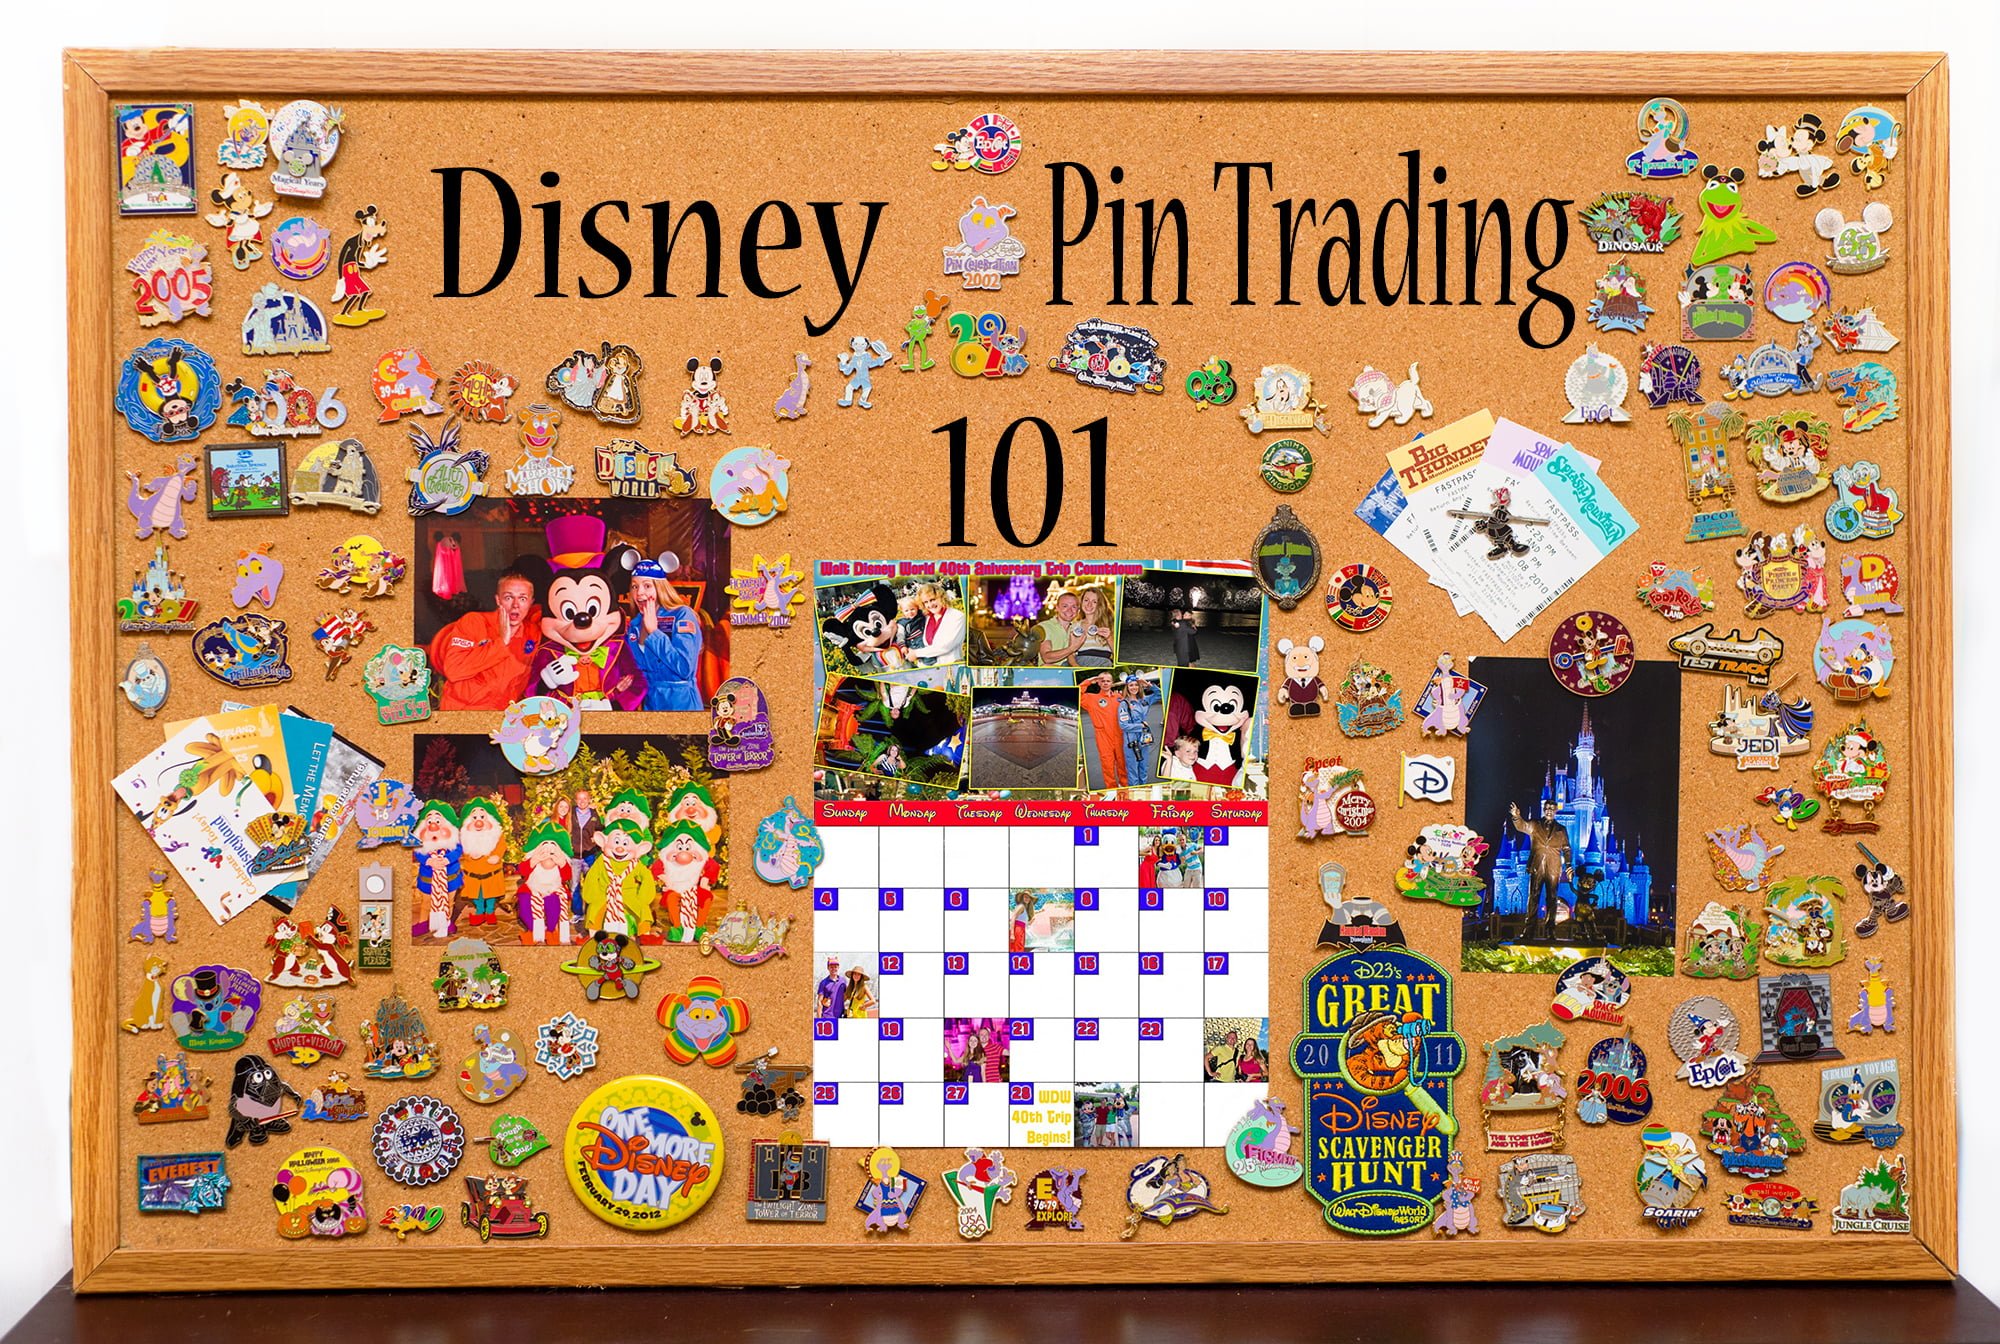 Lot of Disney Trading Pins You Choose The Amount You Need